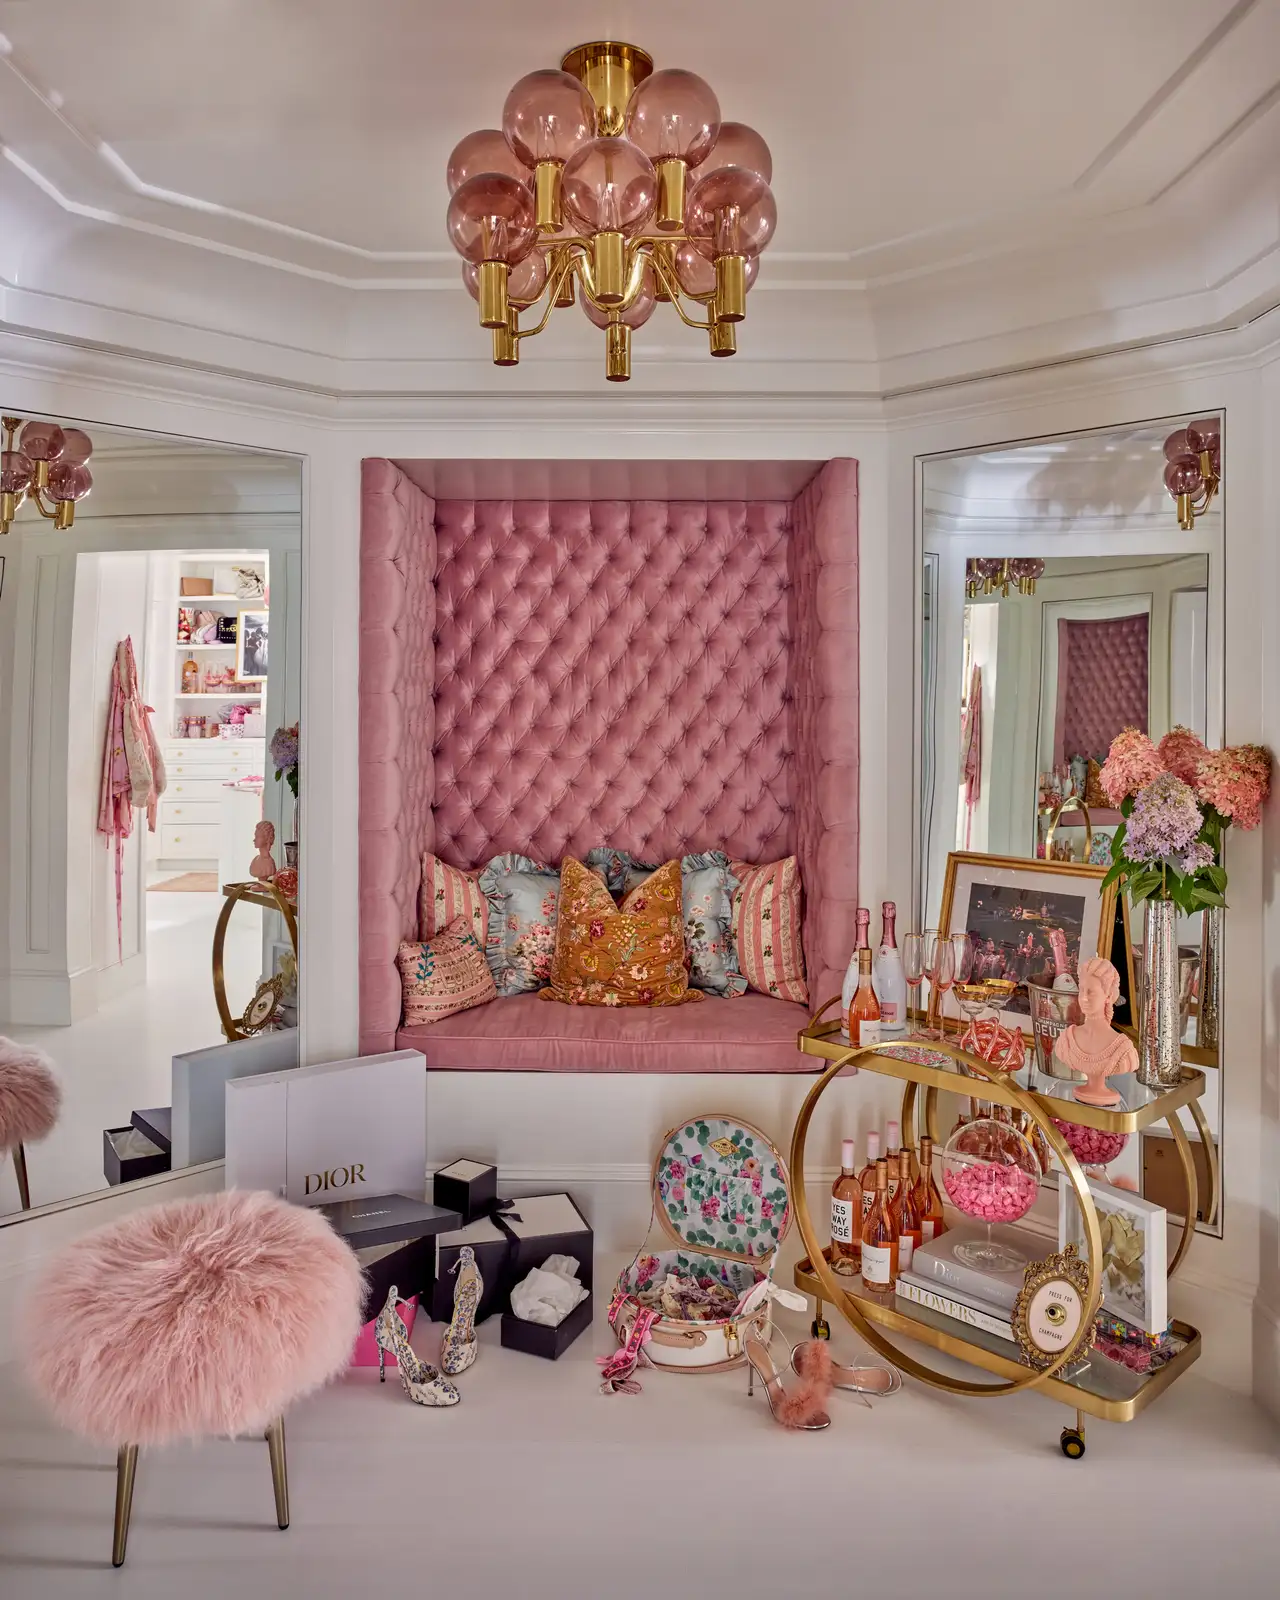 A maximalist closet in white, pink and gold tones